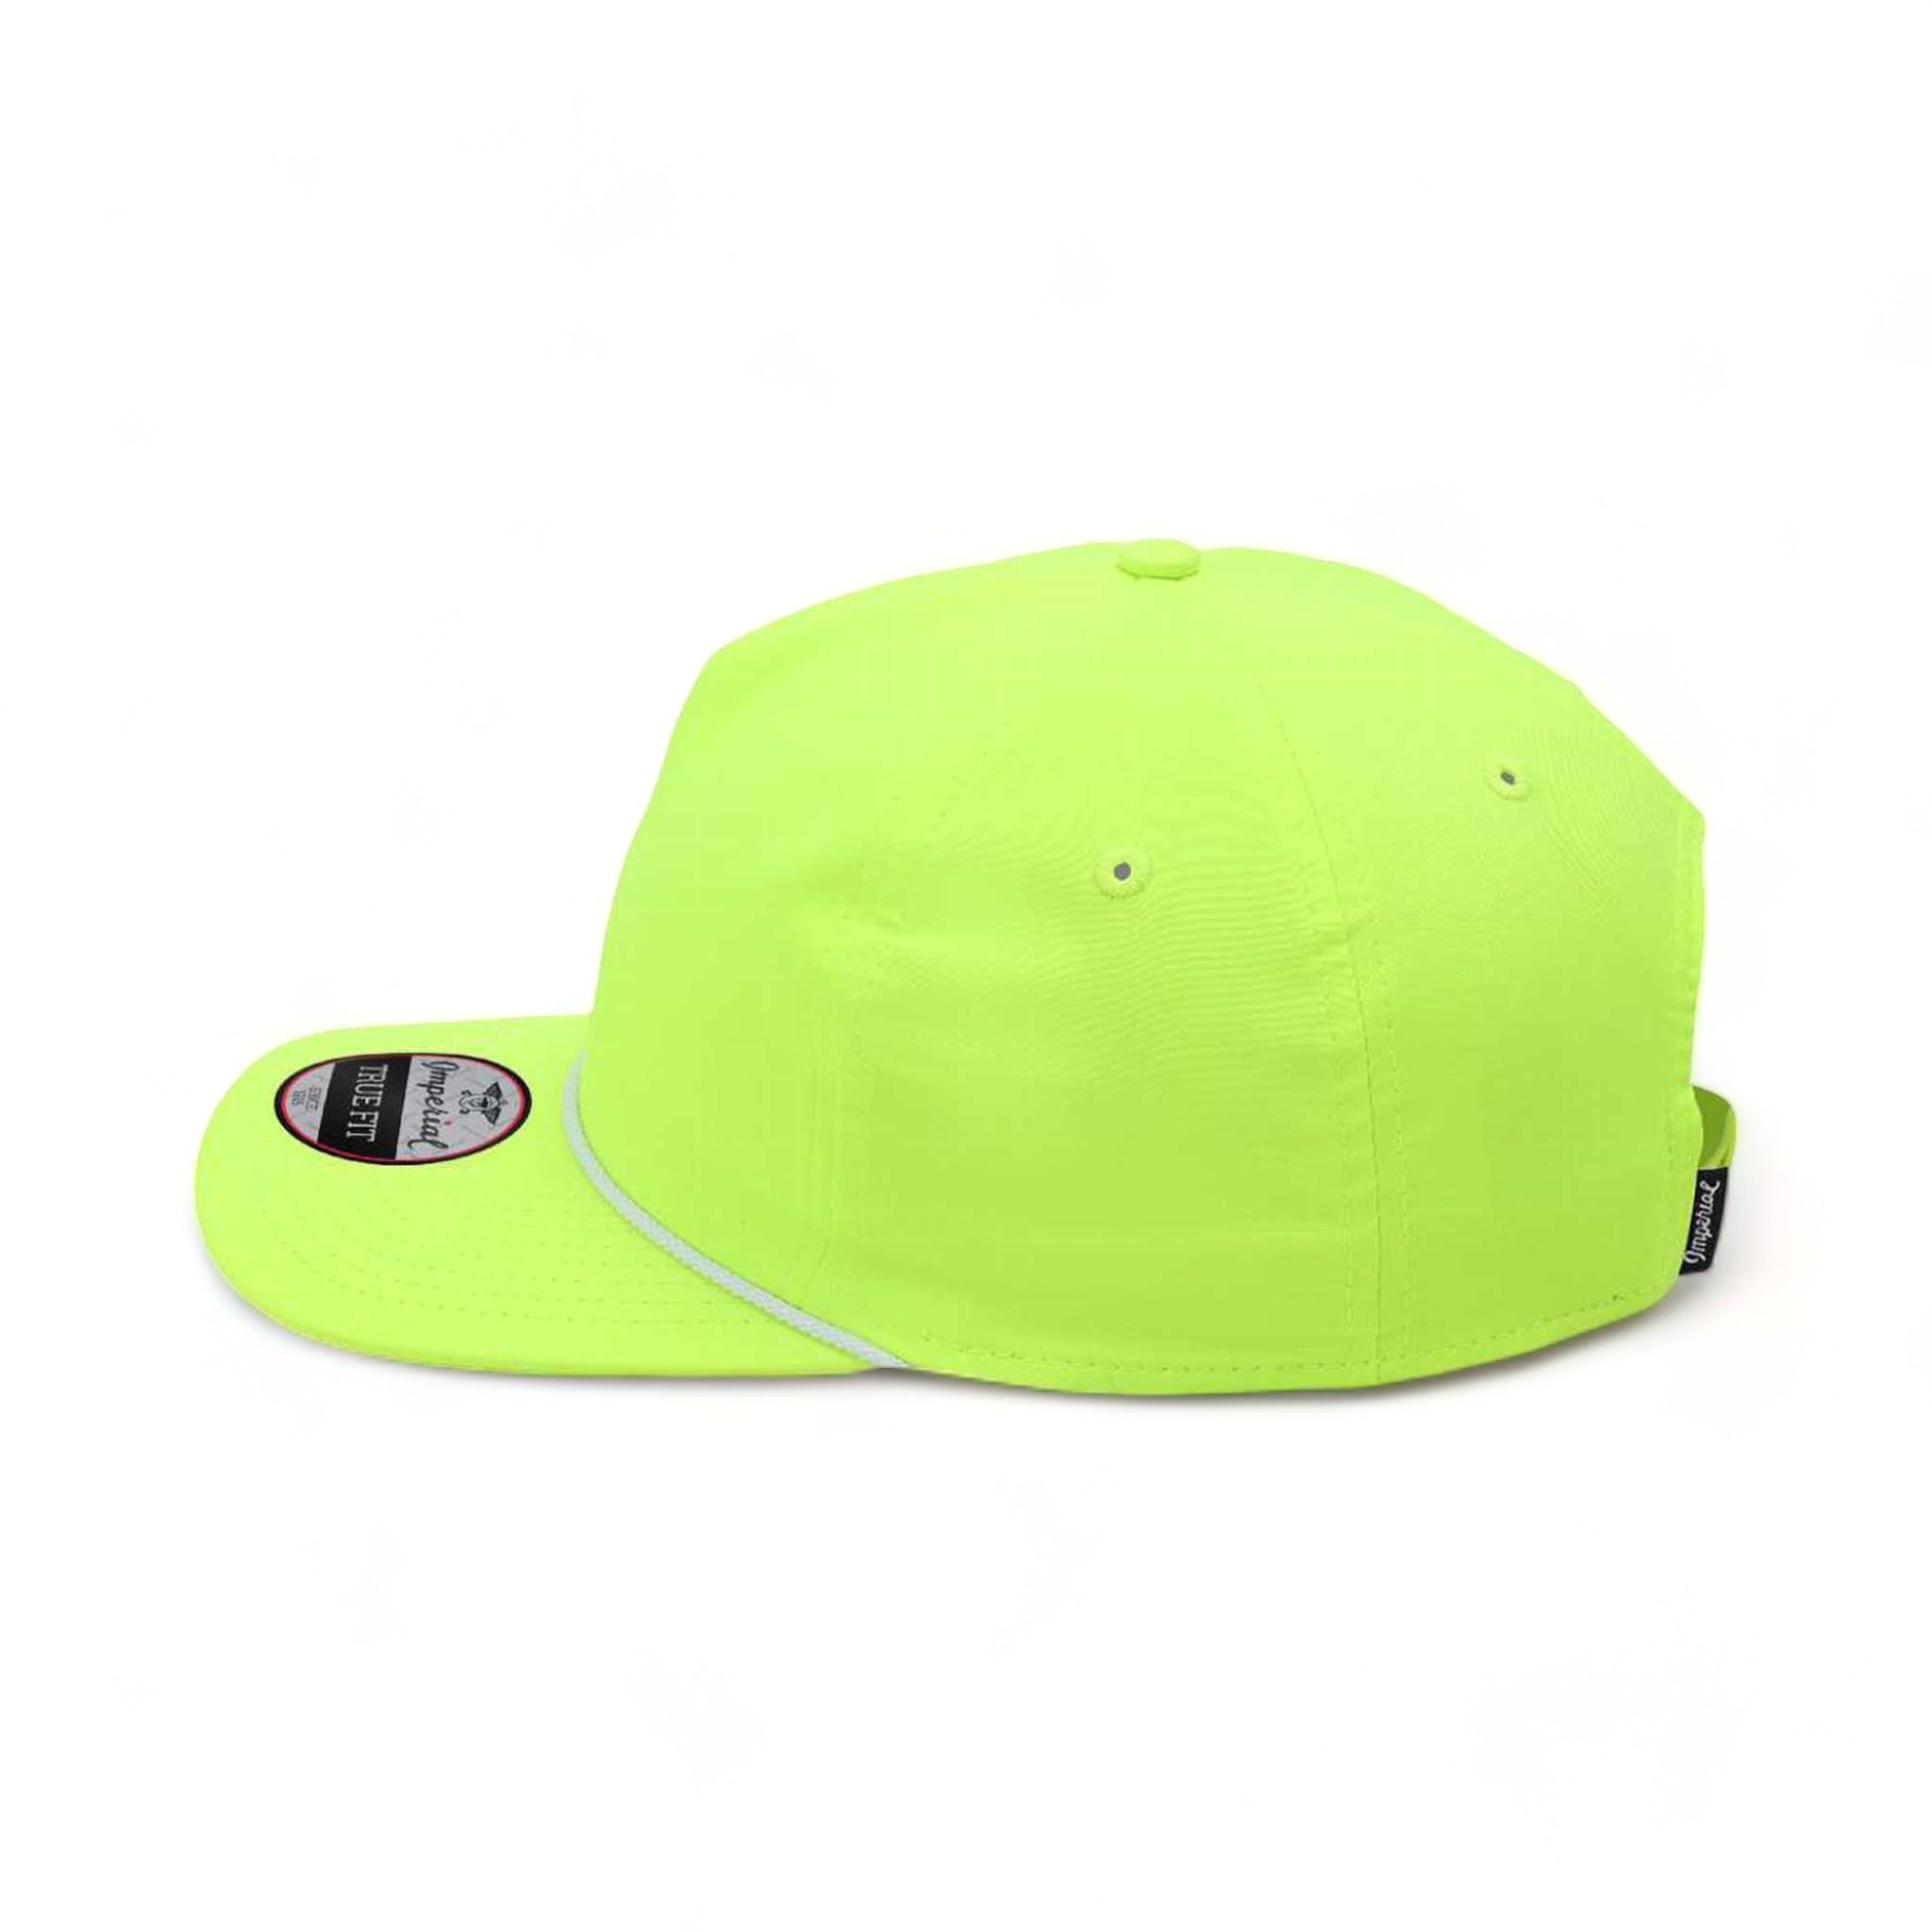 Side view of Imperial 5054 custom hat in neon yellow and white